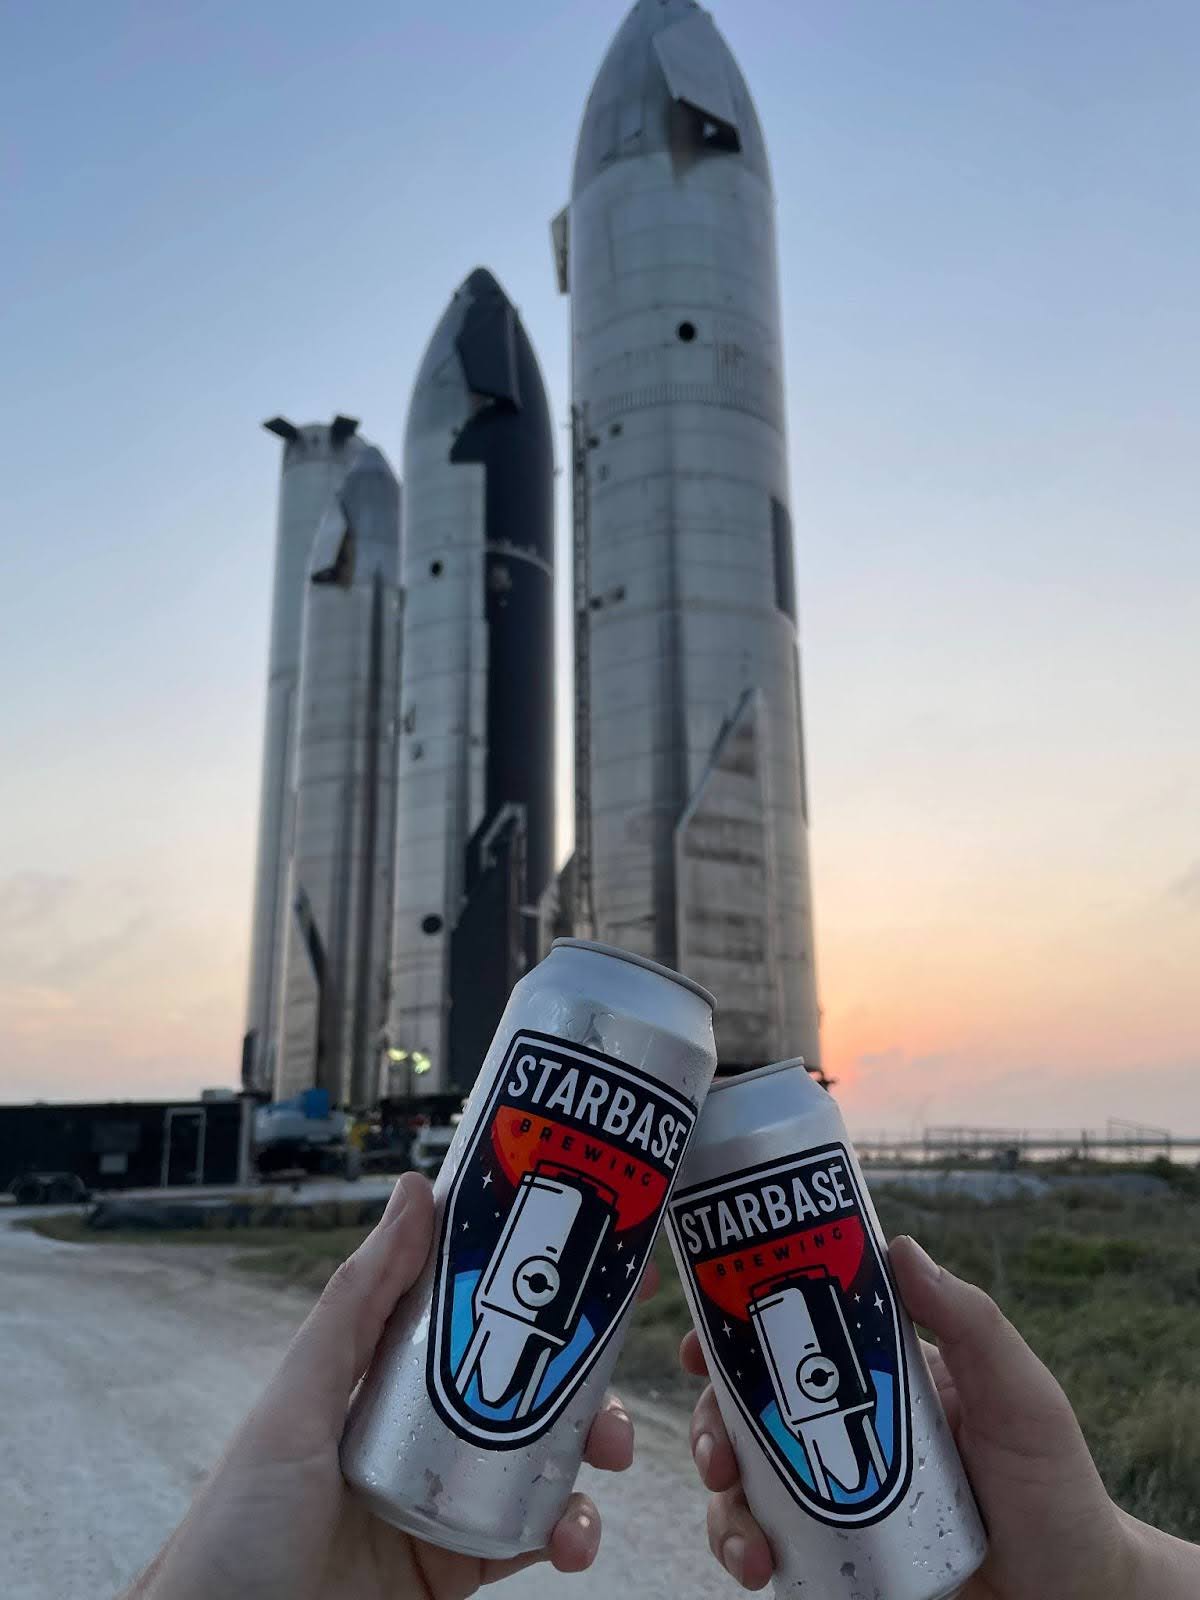 Two people cheersing with Starbase Brewing beers in the SpaceX Rocket Garden at sunset.